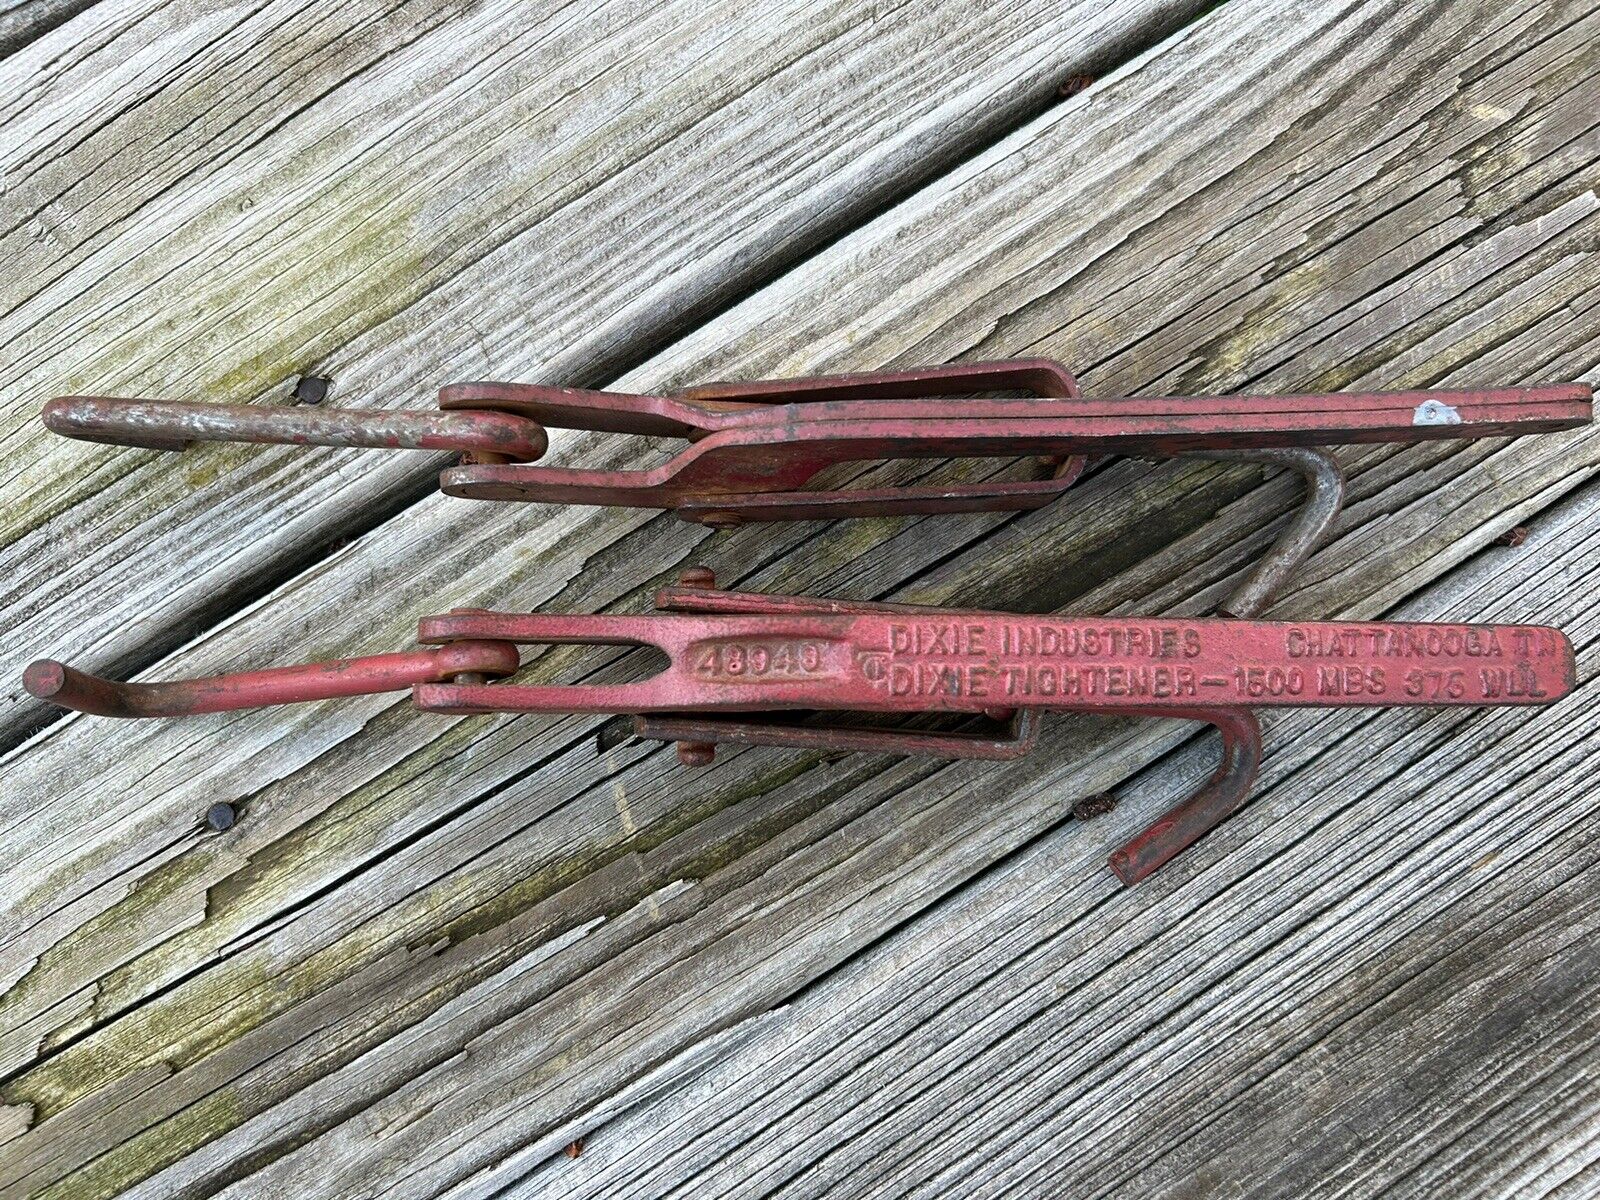 Two Vintage Chain Tighteners DIXIE Industries and SAMSON Chains